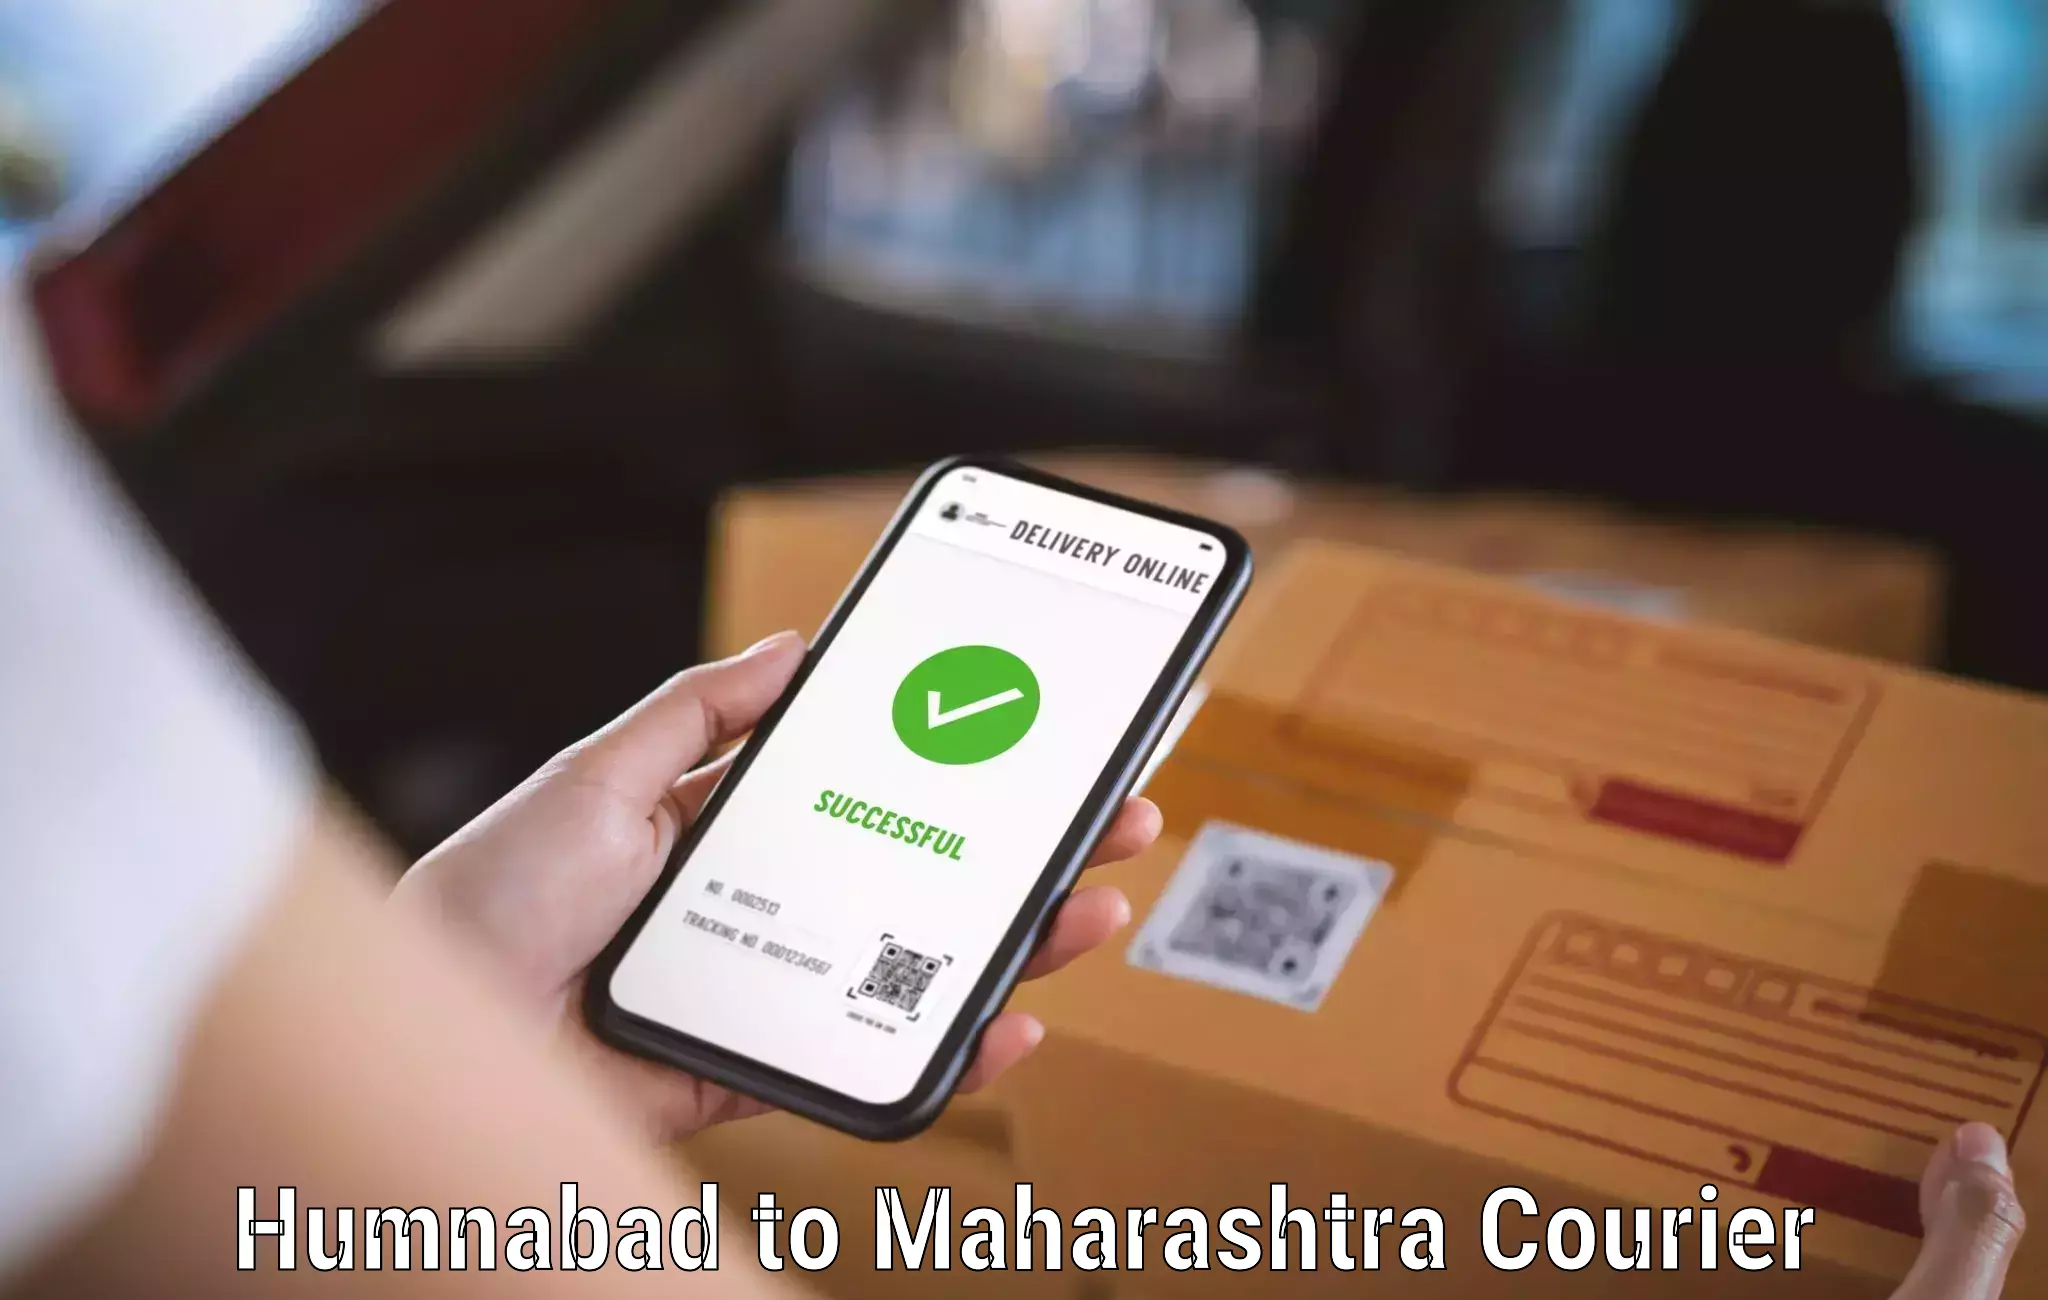 Same-day delivery options Humnabad to Pimpri Chinchwad